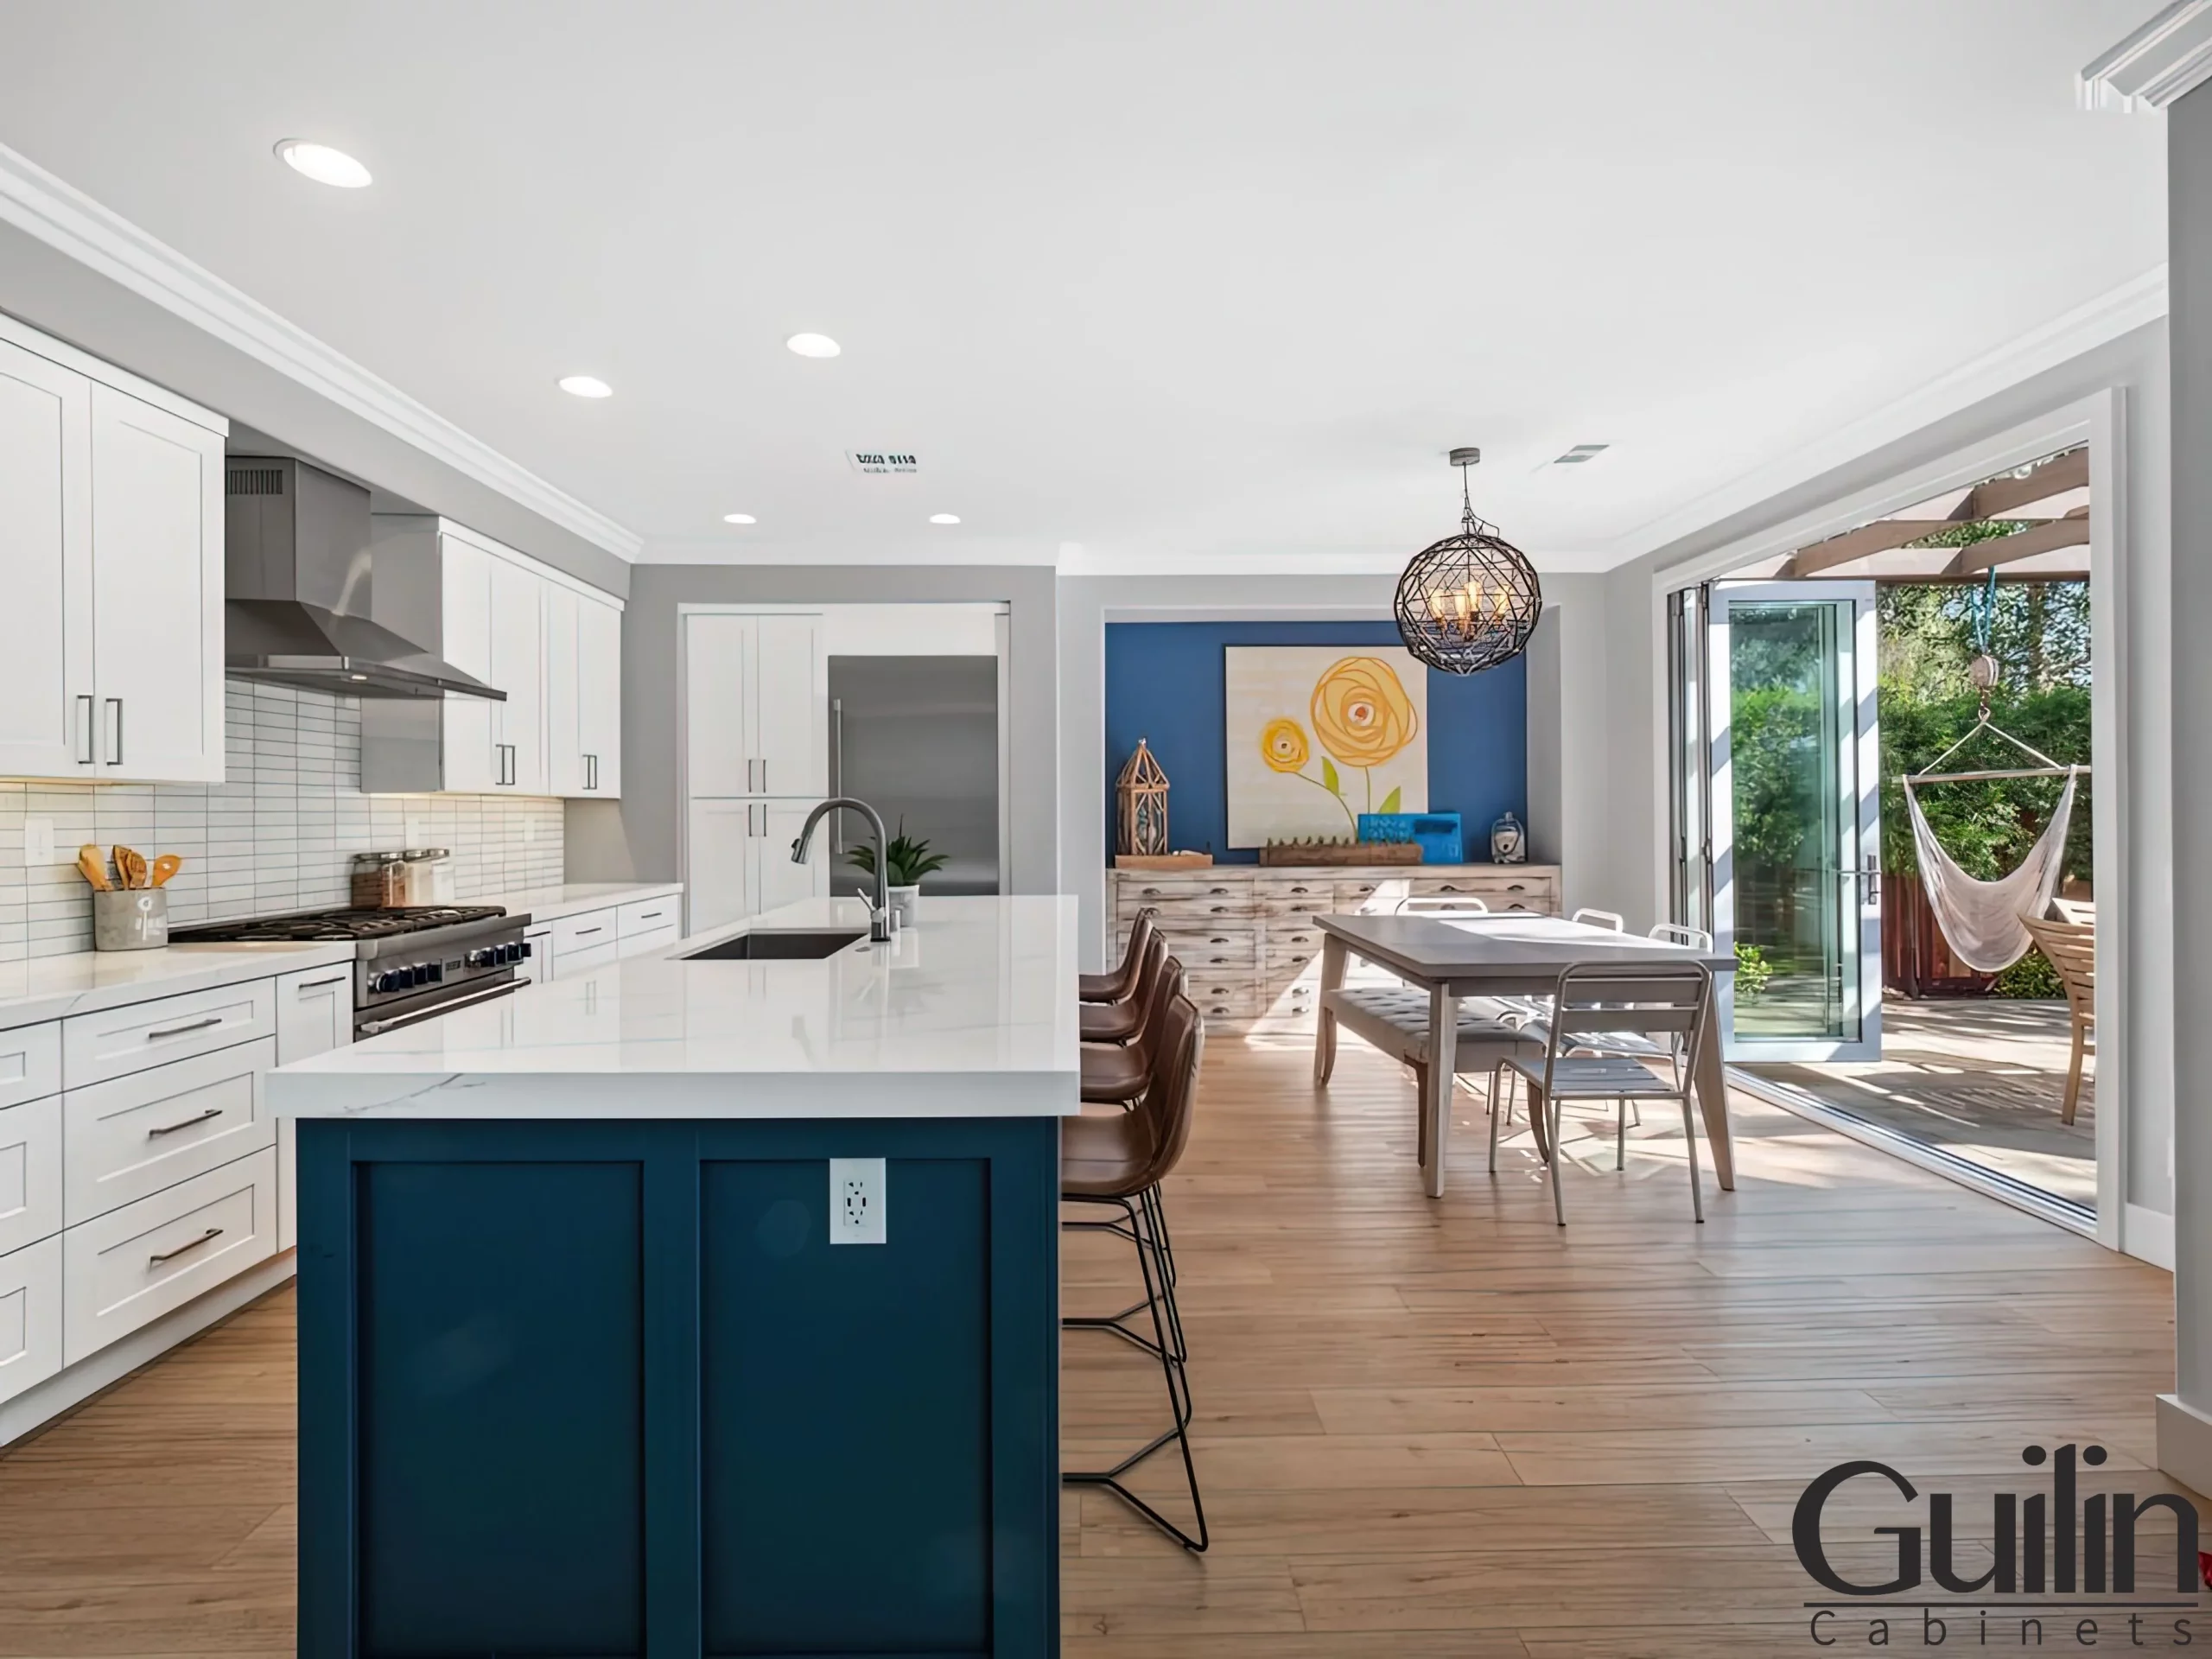 Blue and wood are excellent choices for creating a cozy yet modern look that's sure to impress anyone who walks into your kitchen.